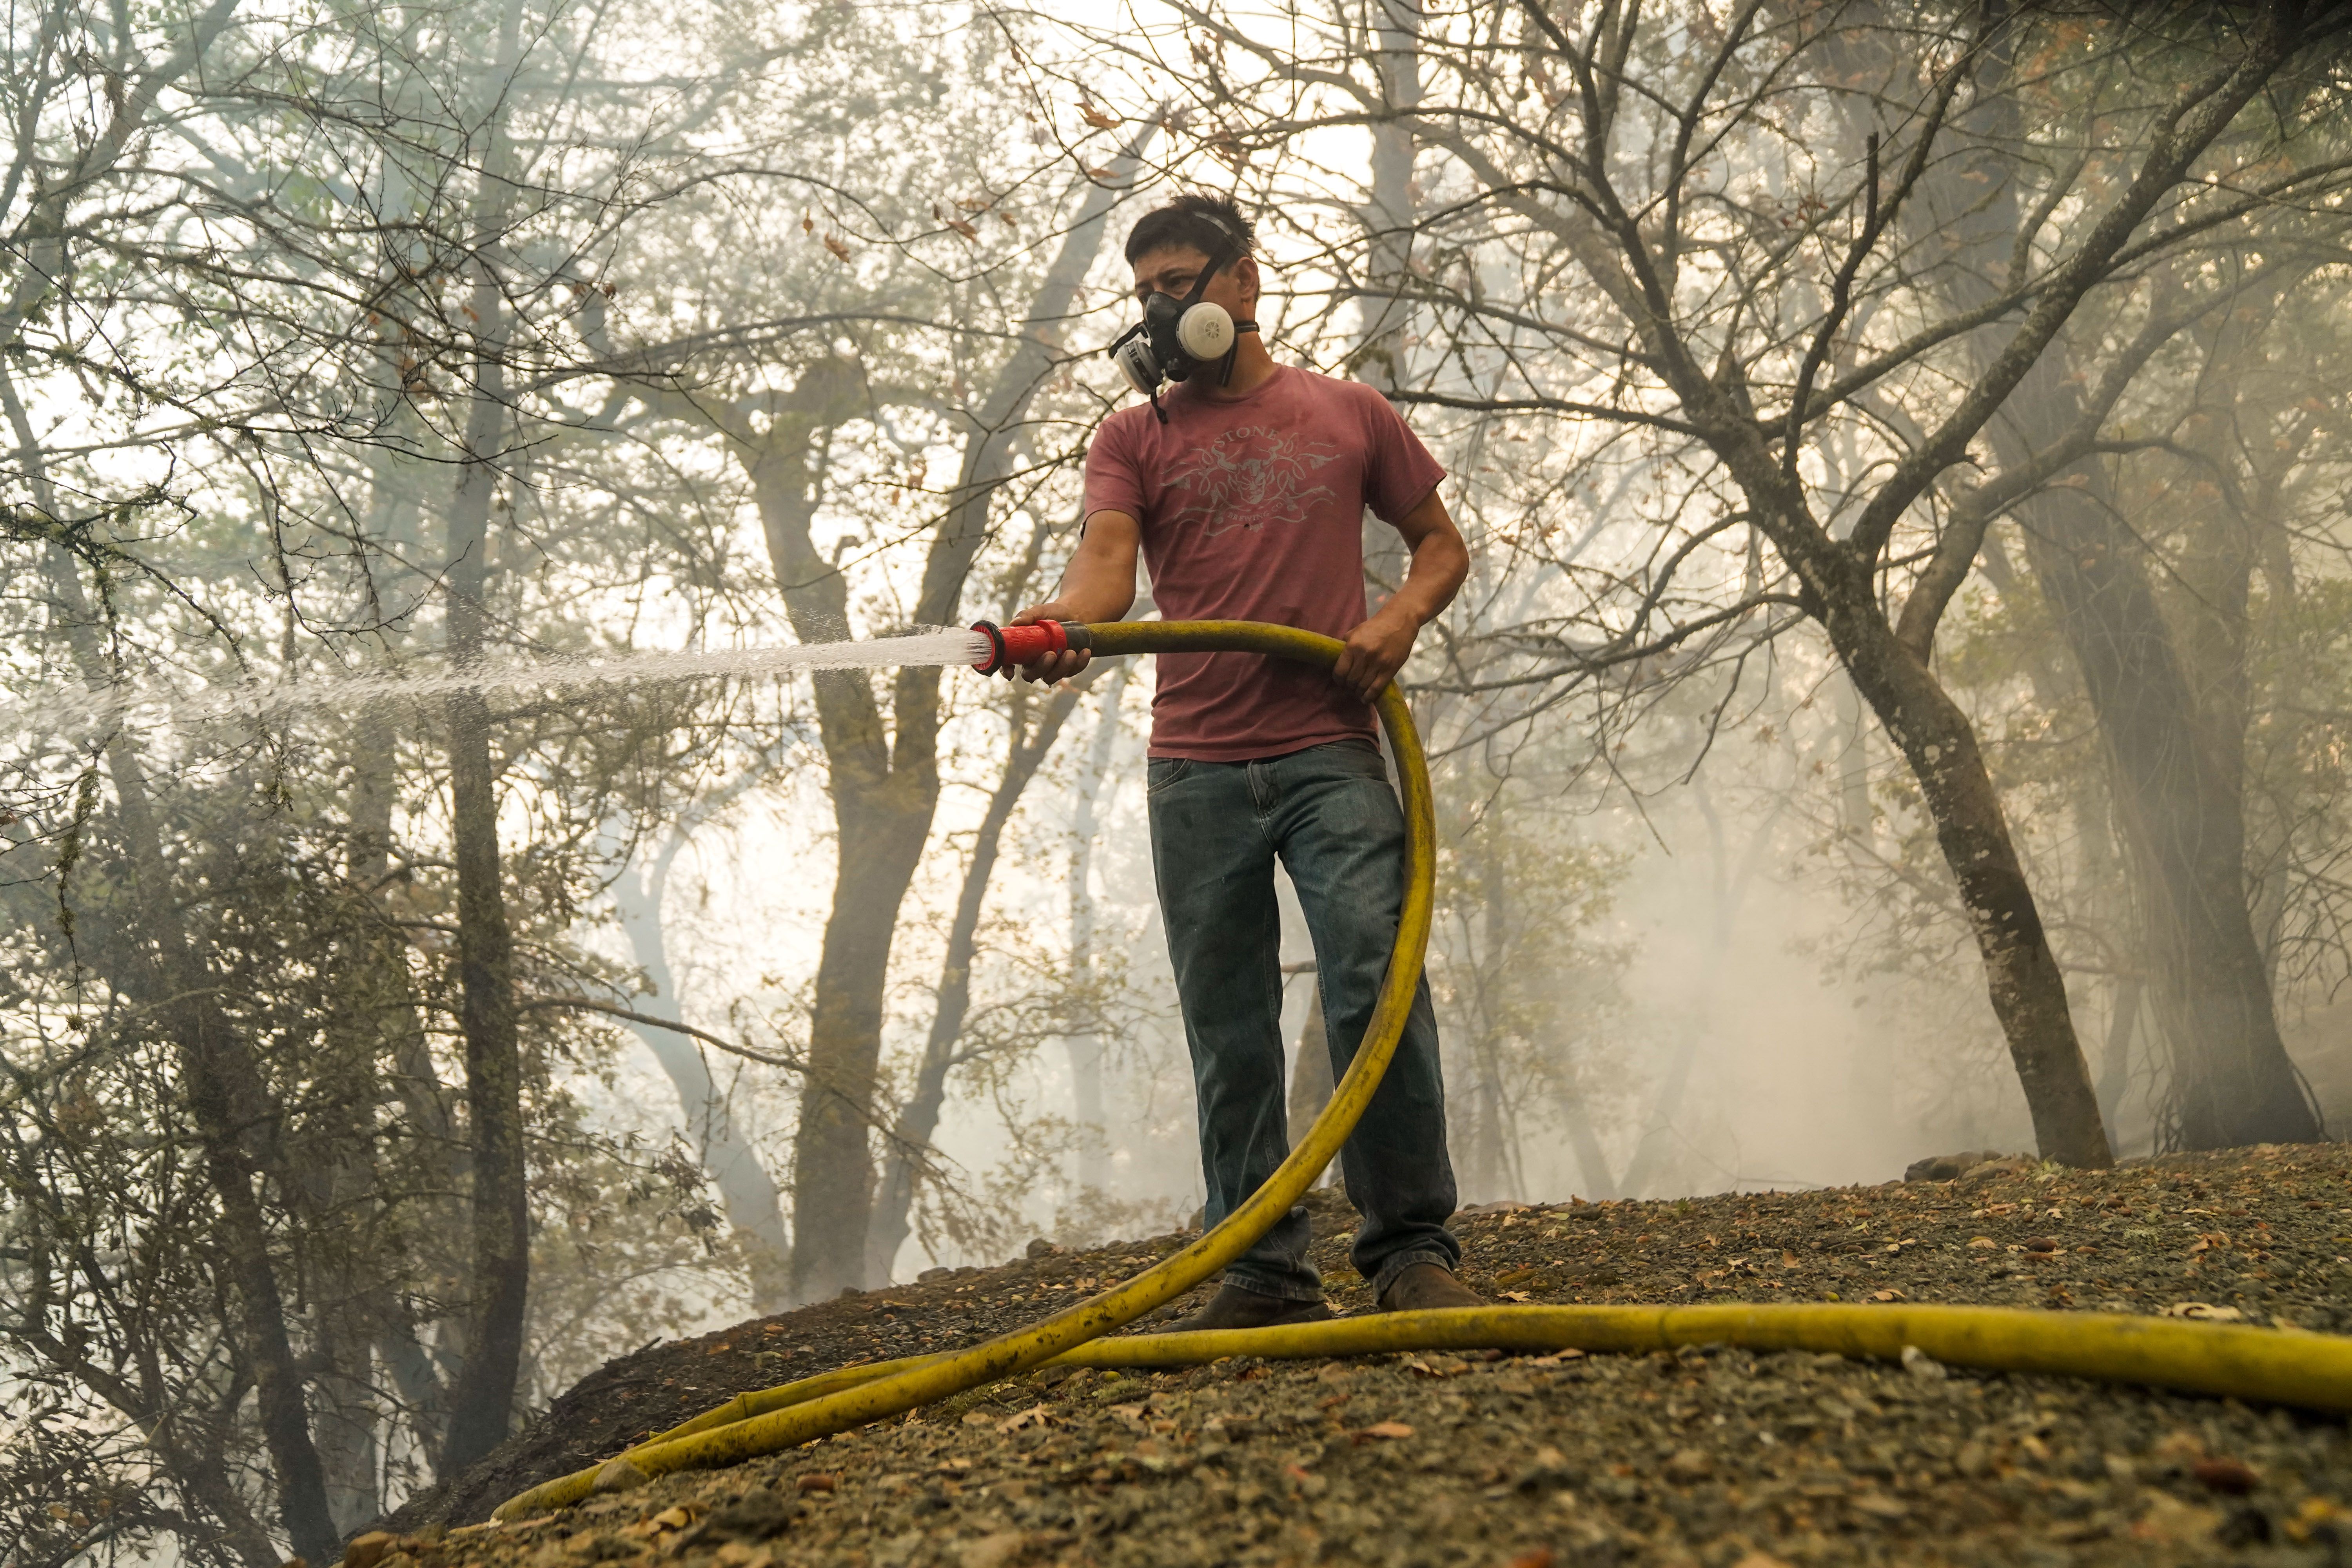  A local resident who didnt want to be named wets down hotspots near a home along CA-128 during the Glass Fire in Napa County on Tuesday, Sept. 29, 2020 in Calistoga, CA. 